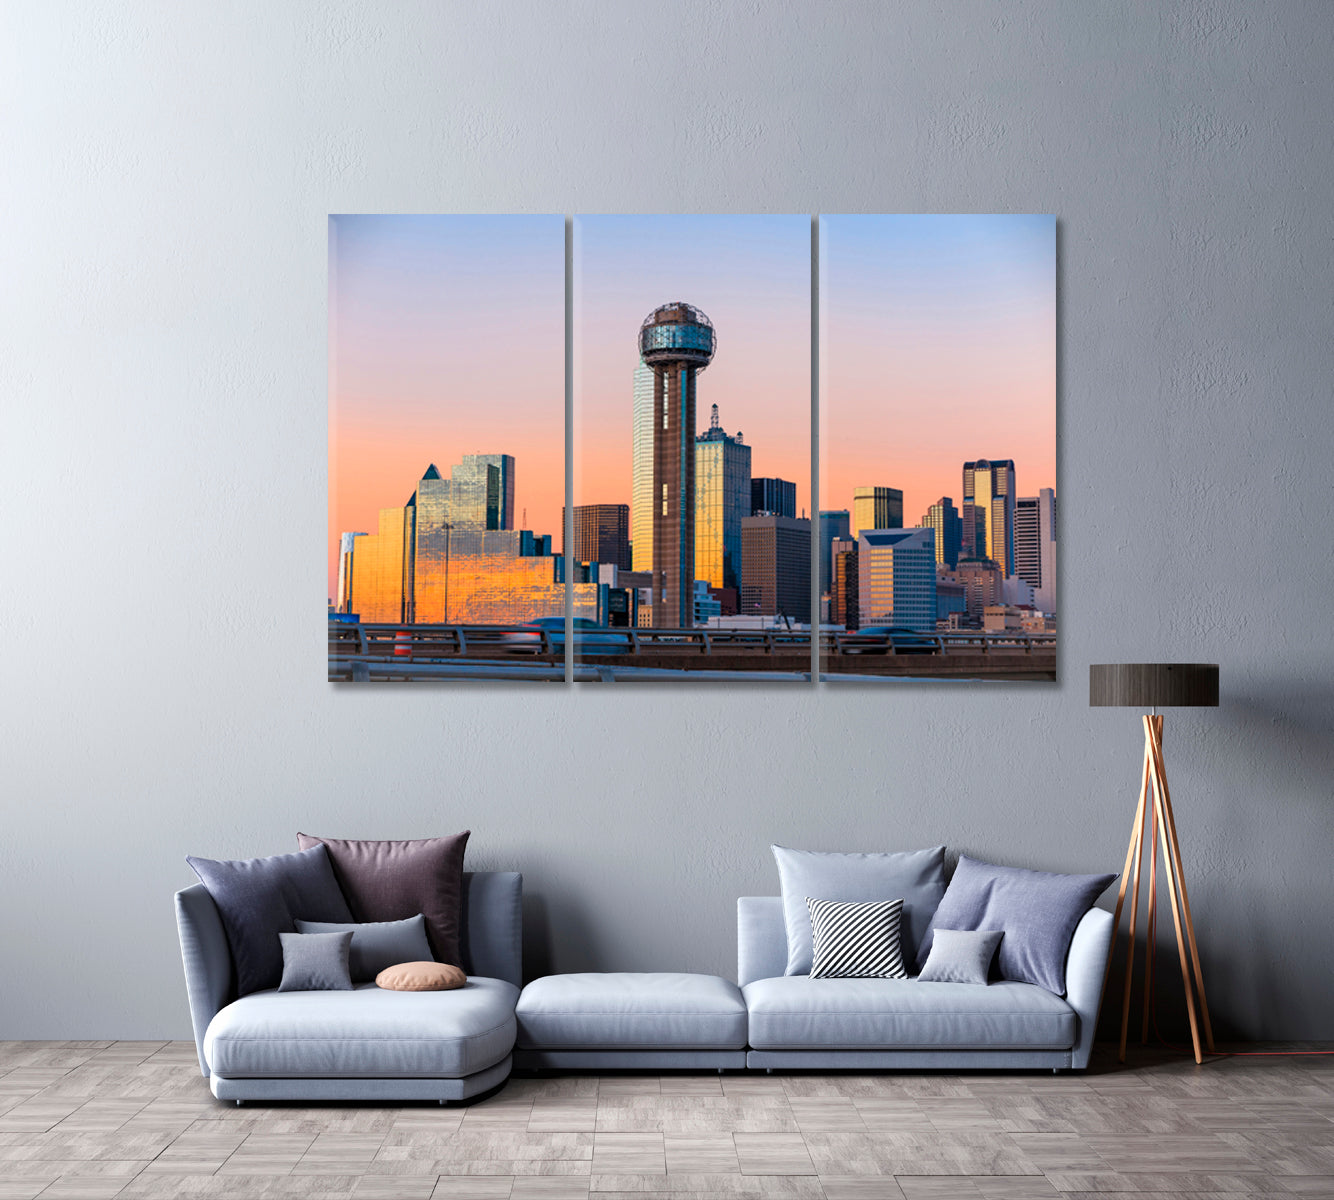 Dallas Skyscrapers at Dusk Canvas Print ArtLexy 3 Panels 36"x24" inches 